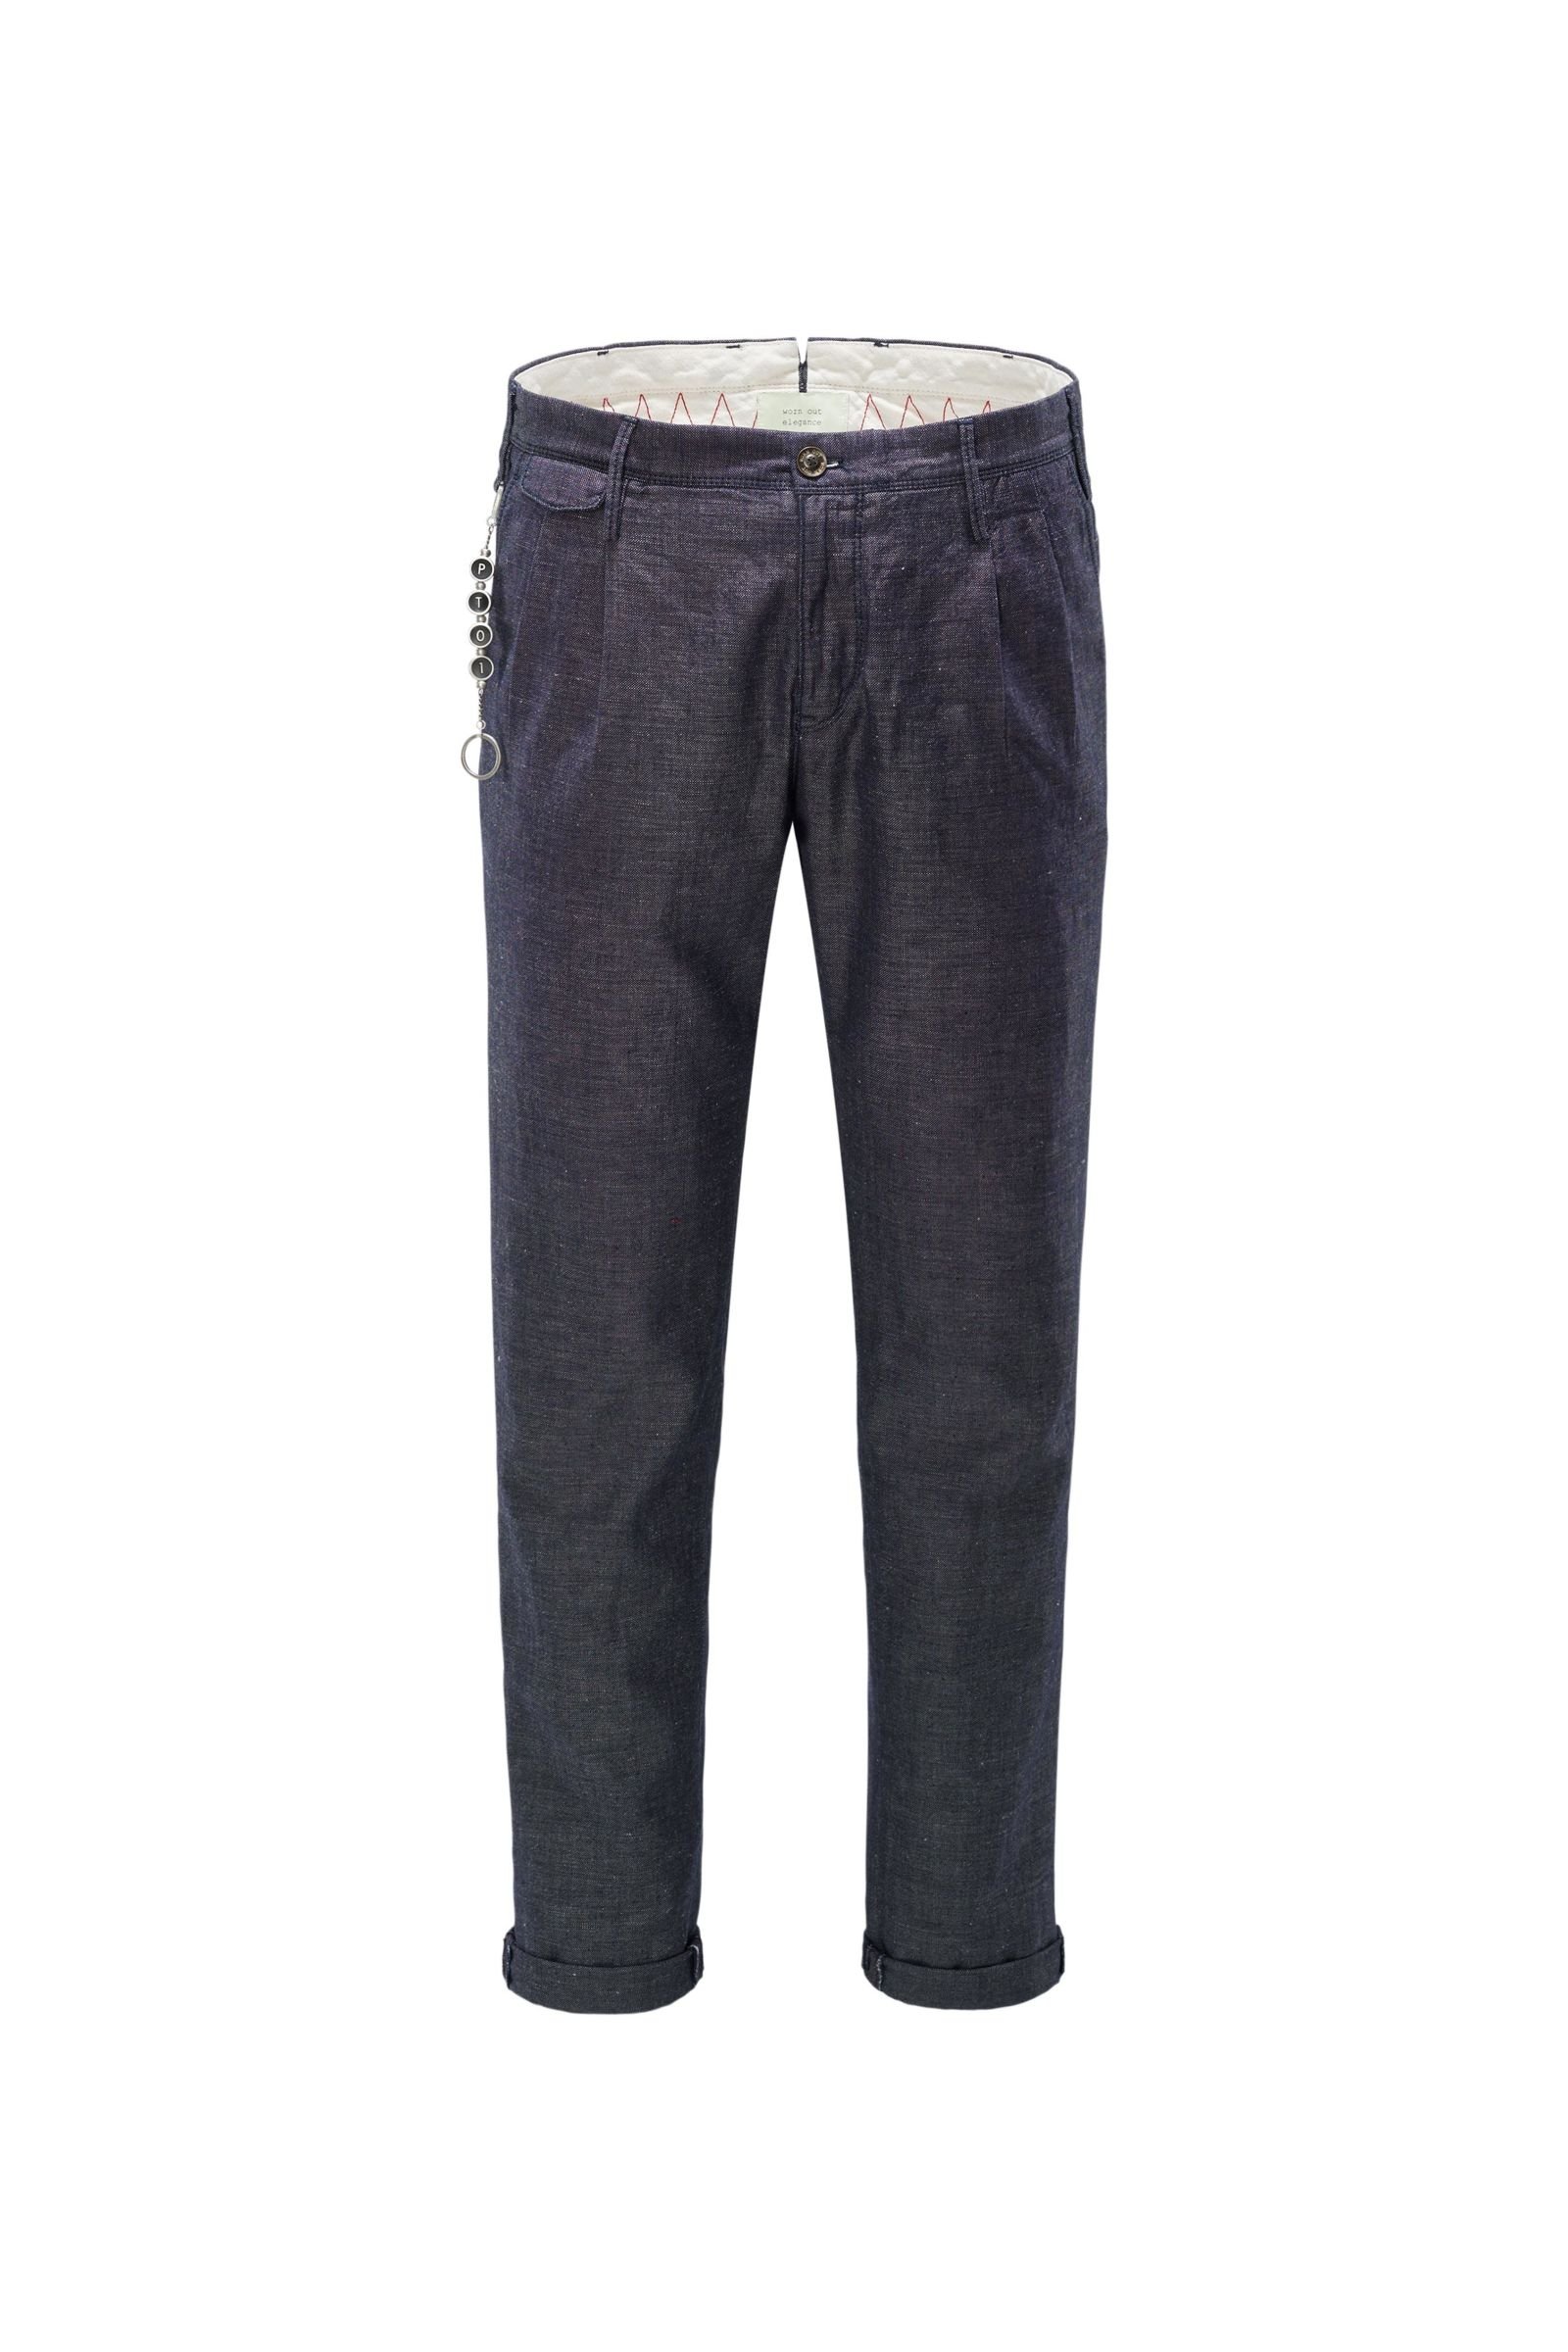 Trousers 'Arial Worn out Elegance' navy